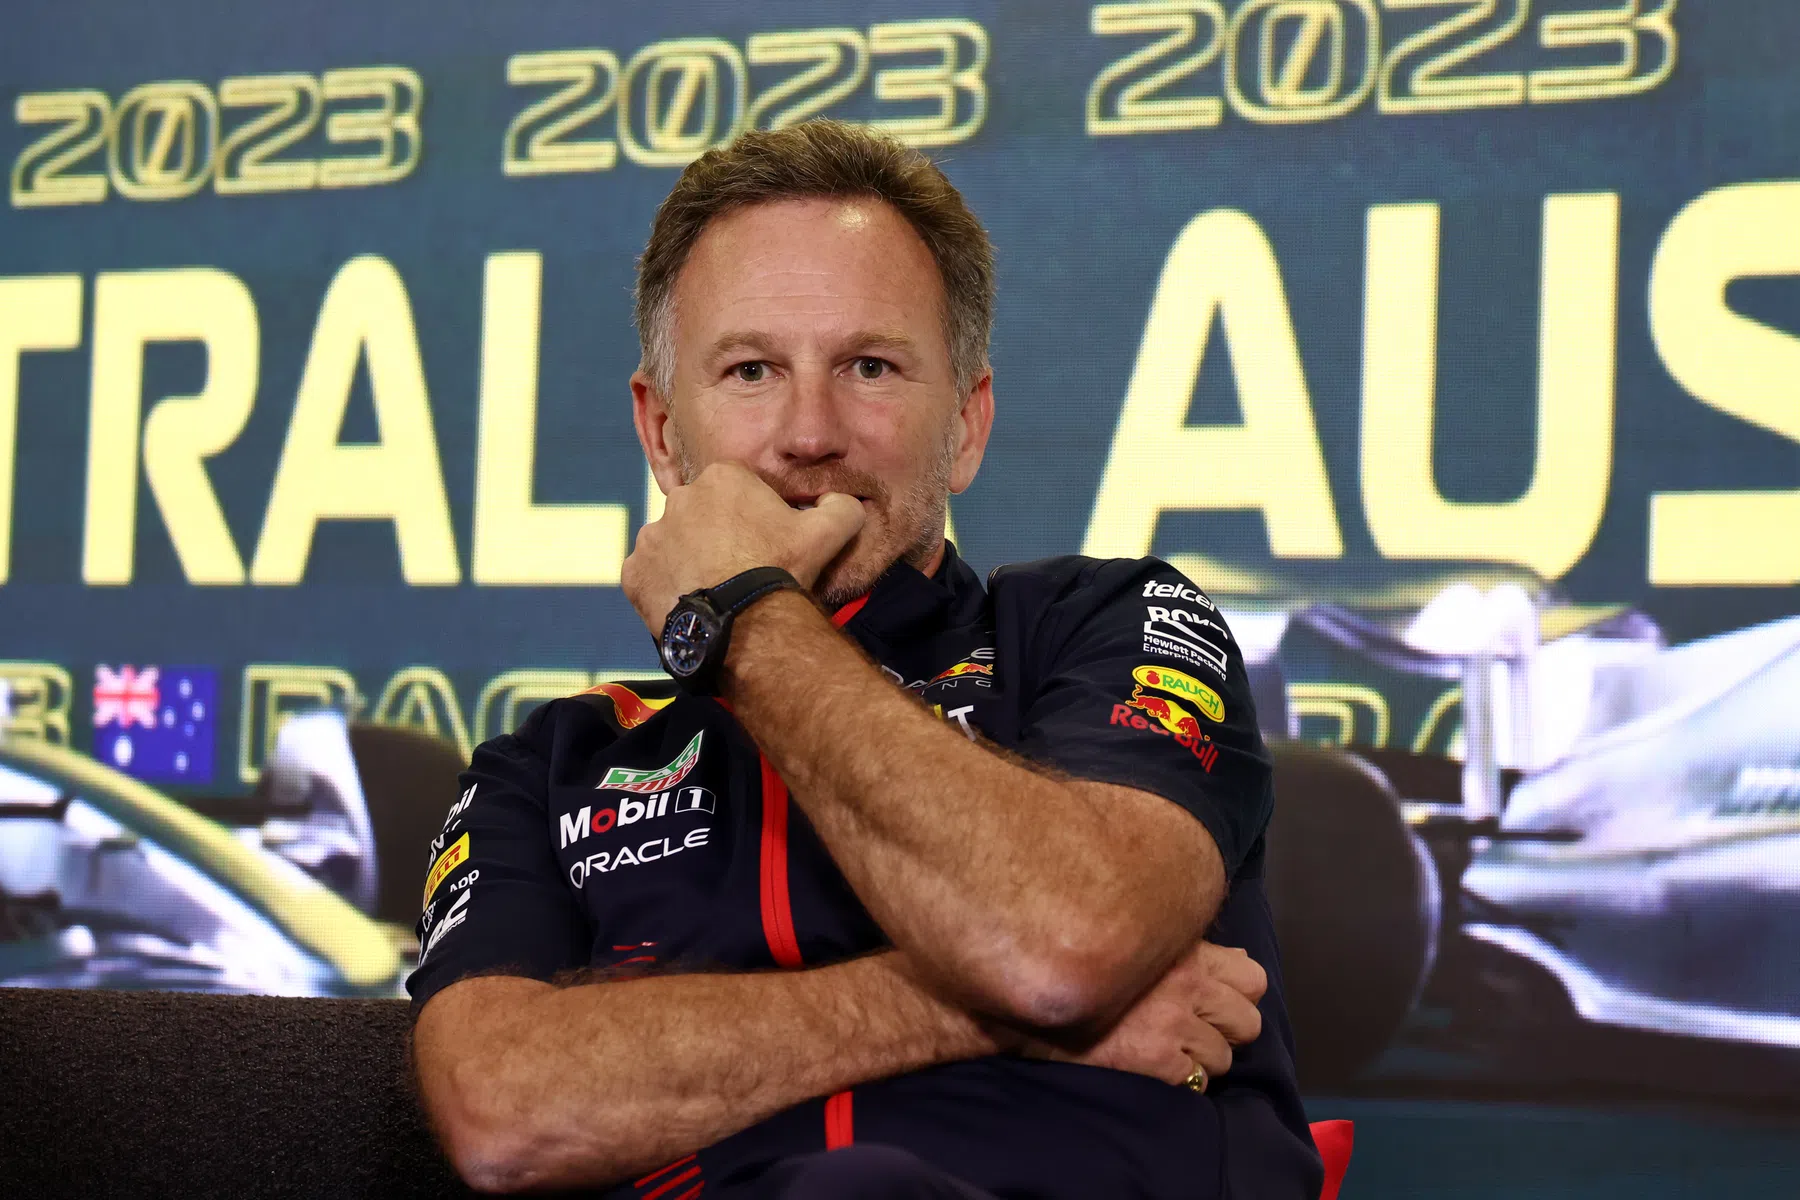 D-day for Horner: What will happen today at Red Bull Racing?